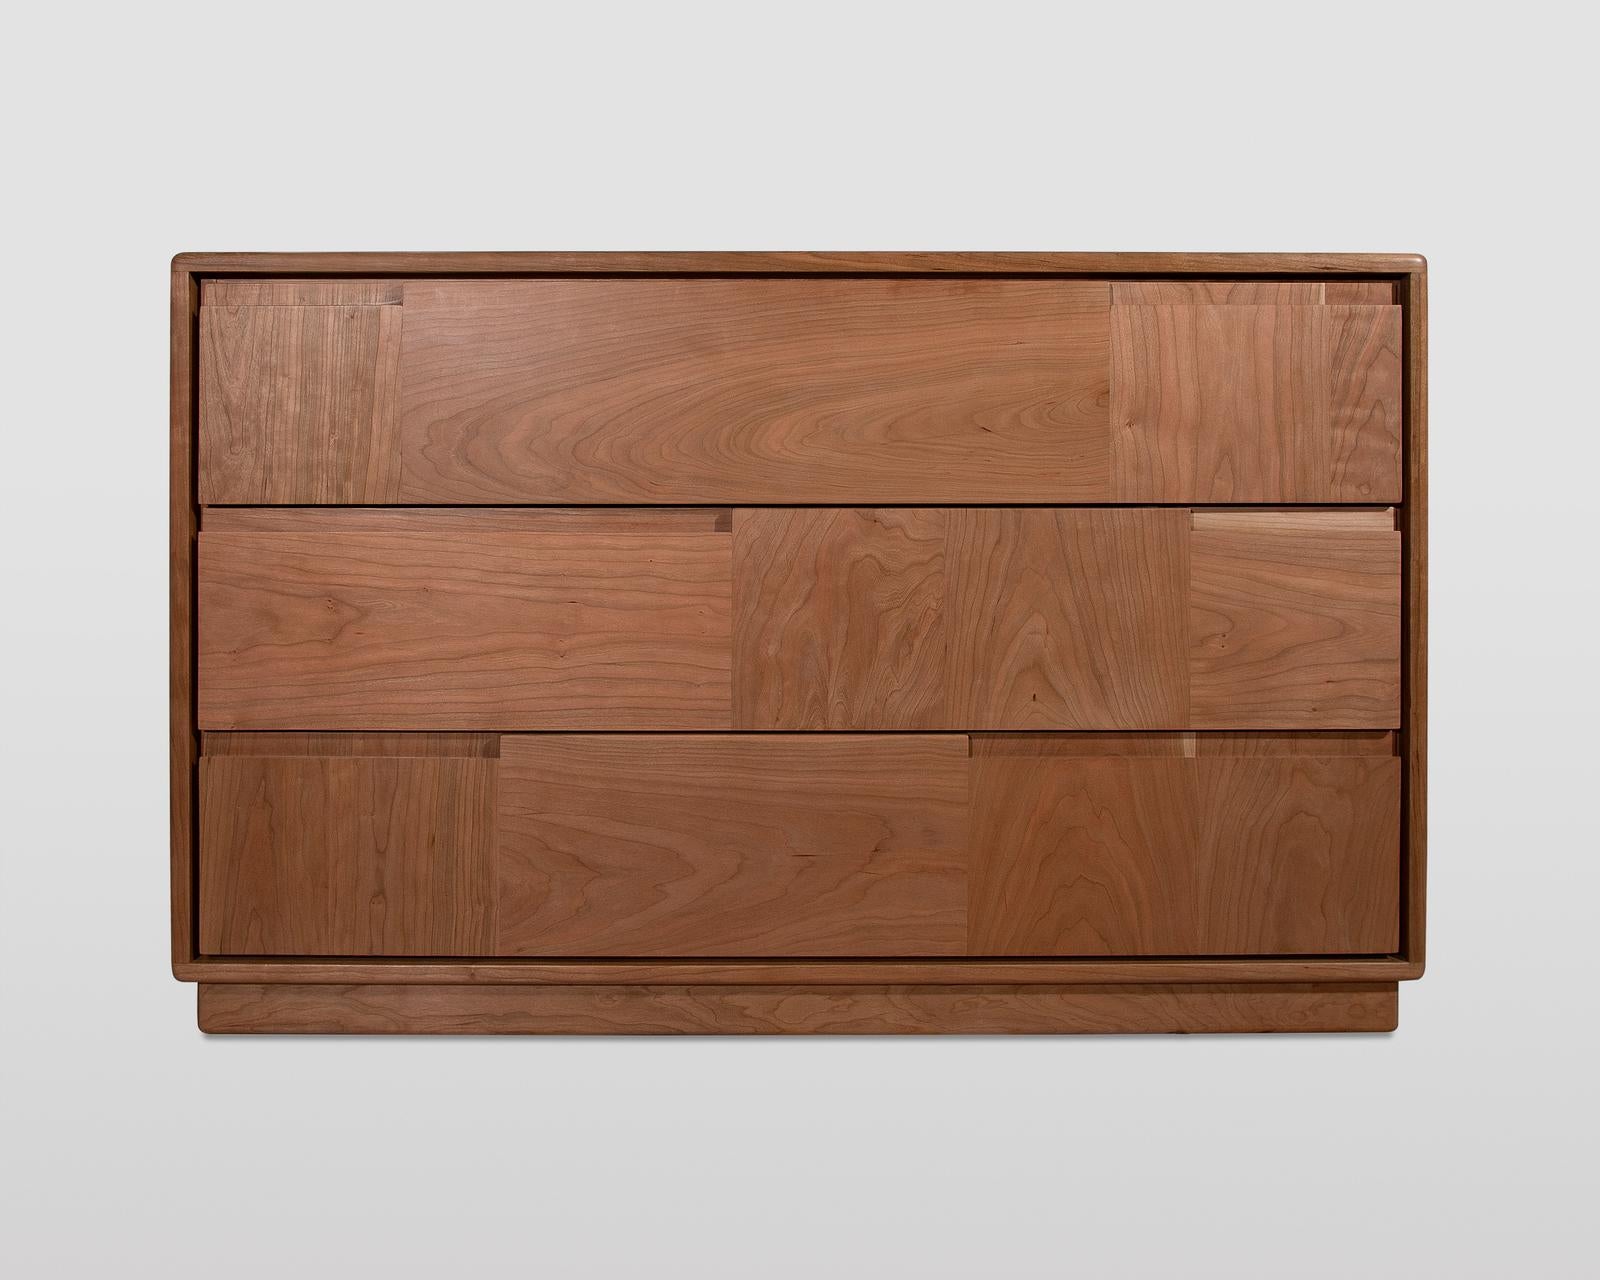 Boasting pure and simple lines, the Nordic Chest of Drawers represents modern Italian cabinetry at its finest. Handcrafted of solid cherry wood, it features three drawers with a Blumotion slow closing system, whose front panels showcase the wood’s